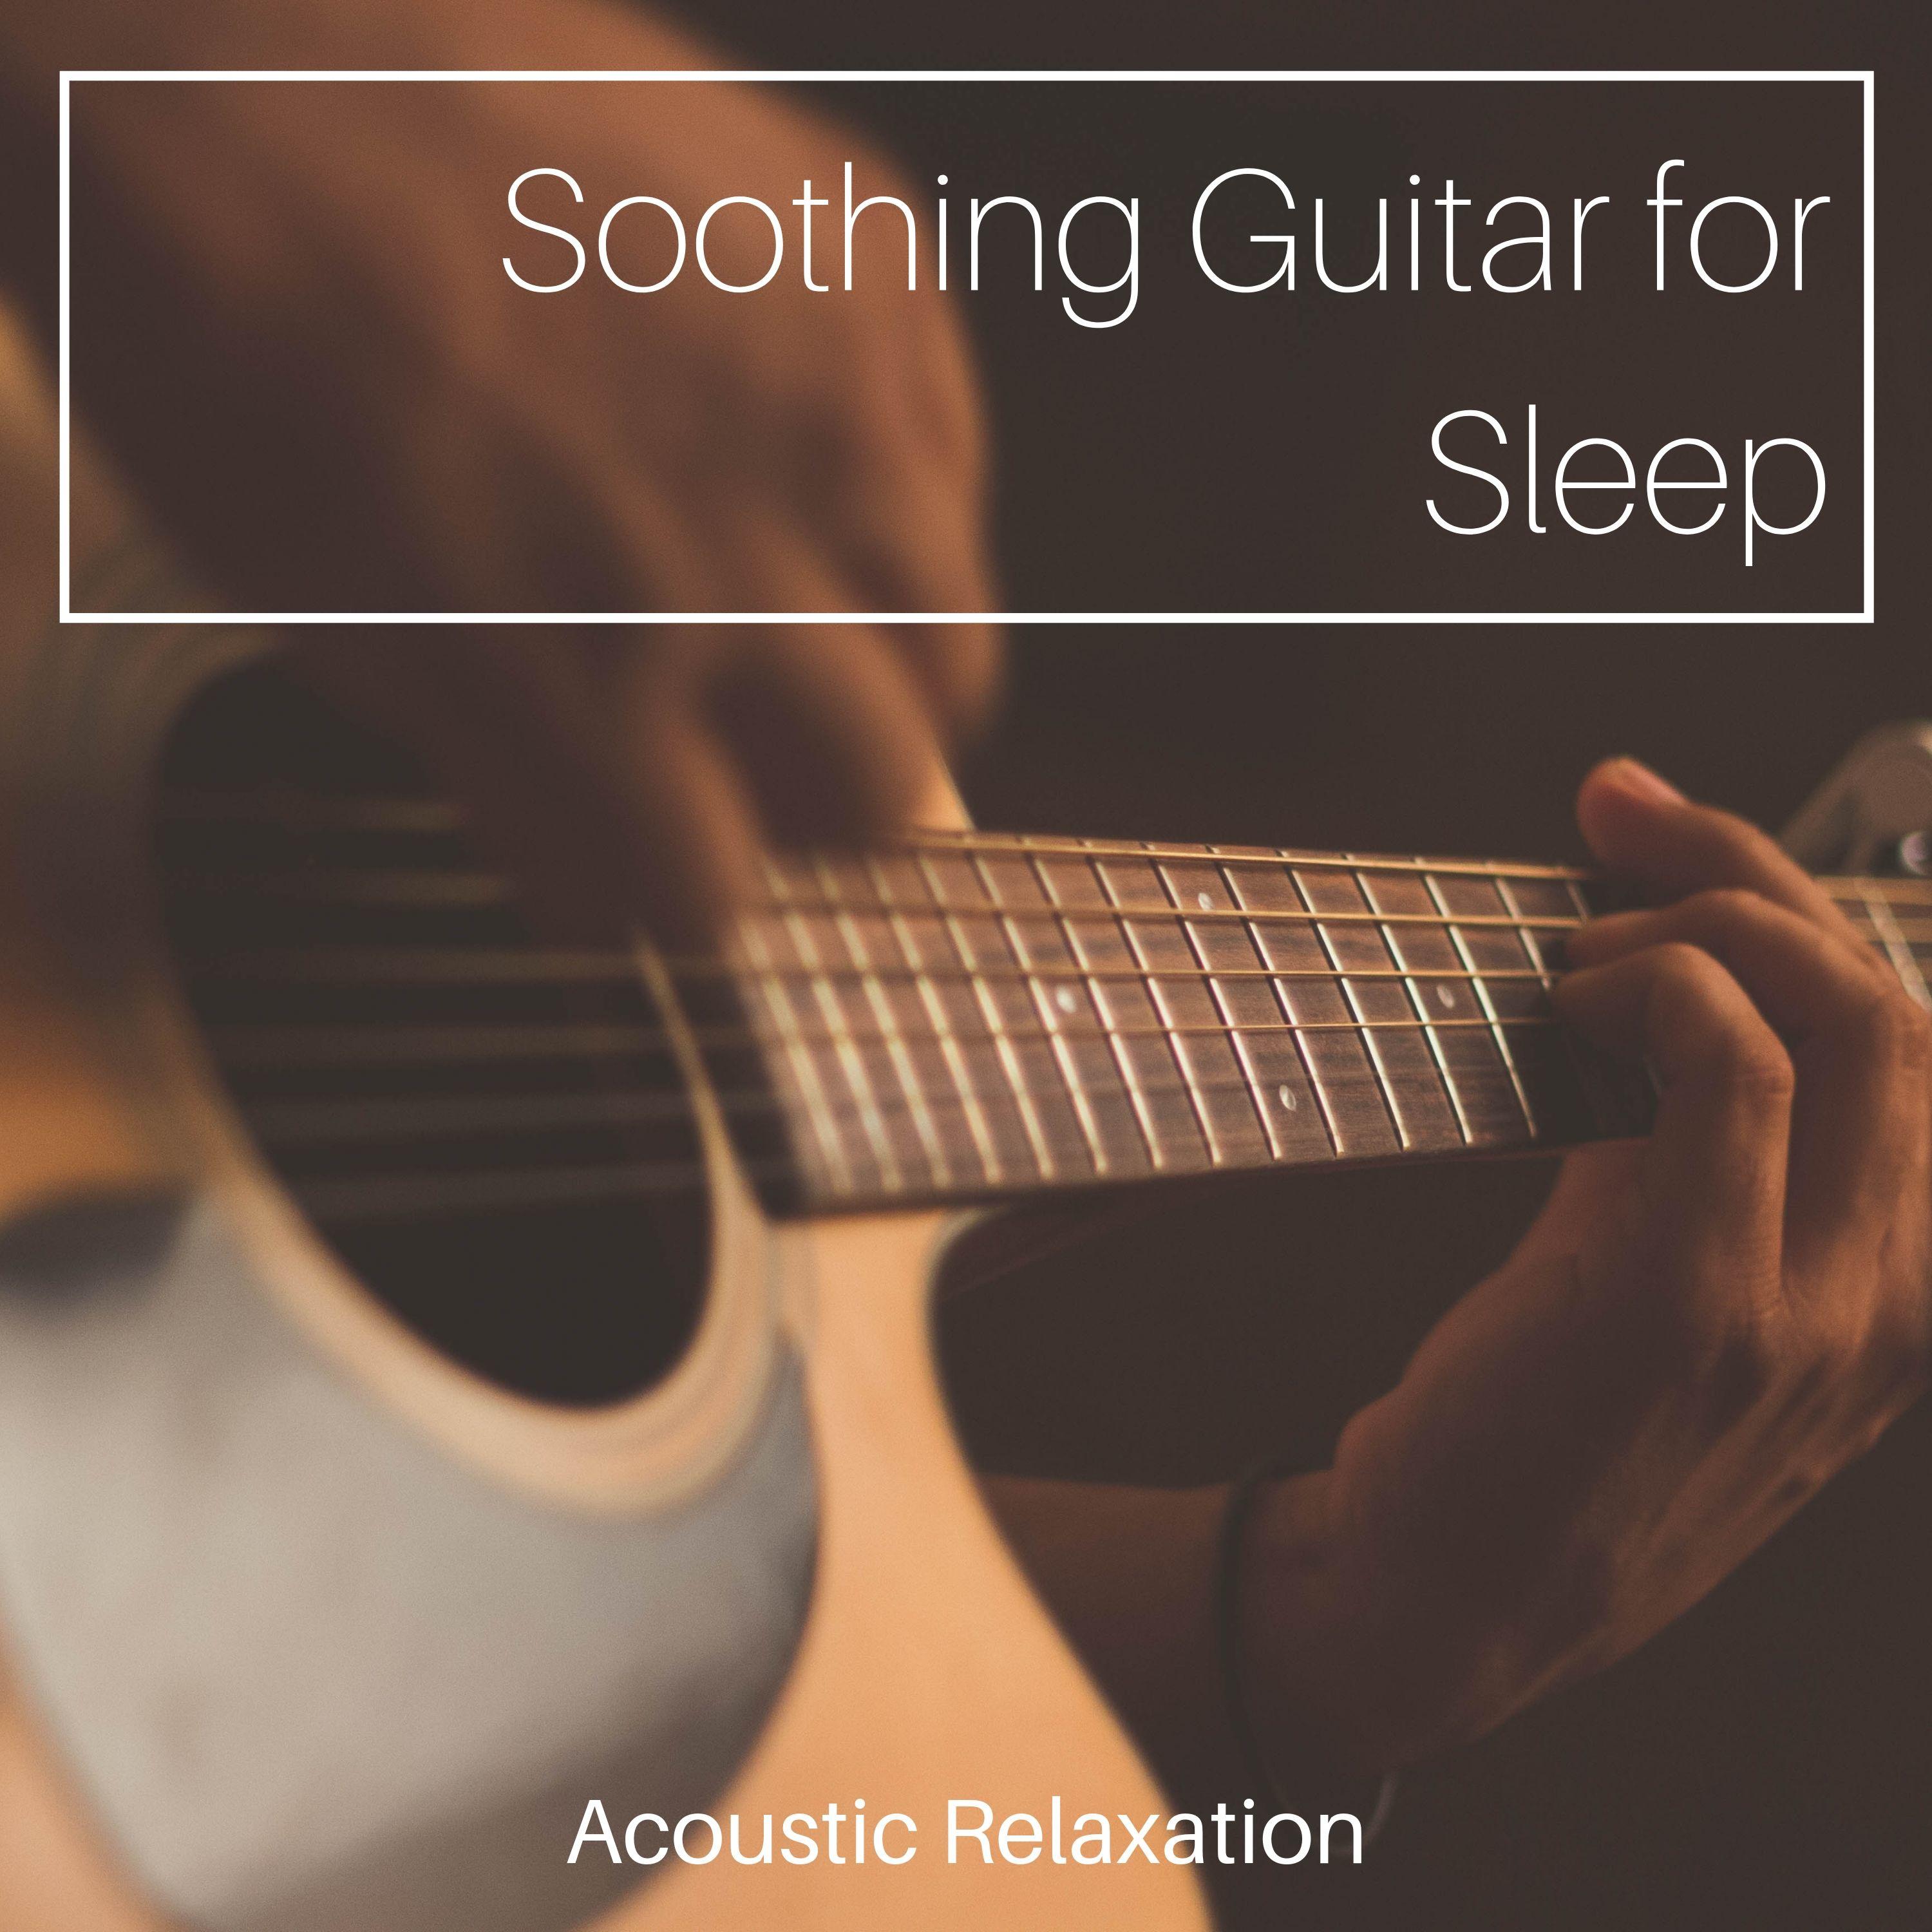 Soothing Guitar for Sleep